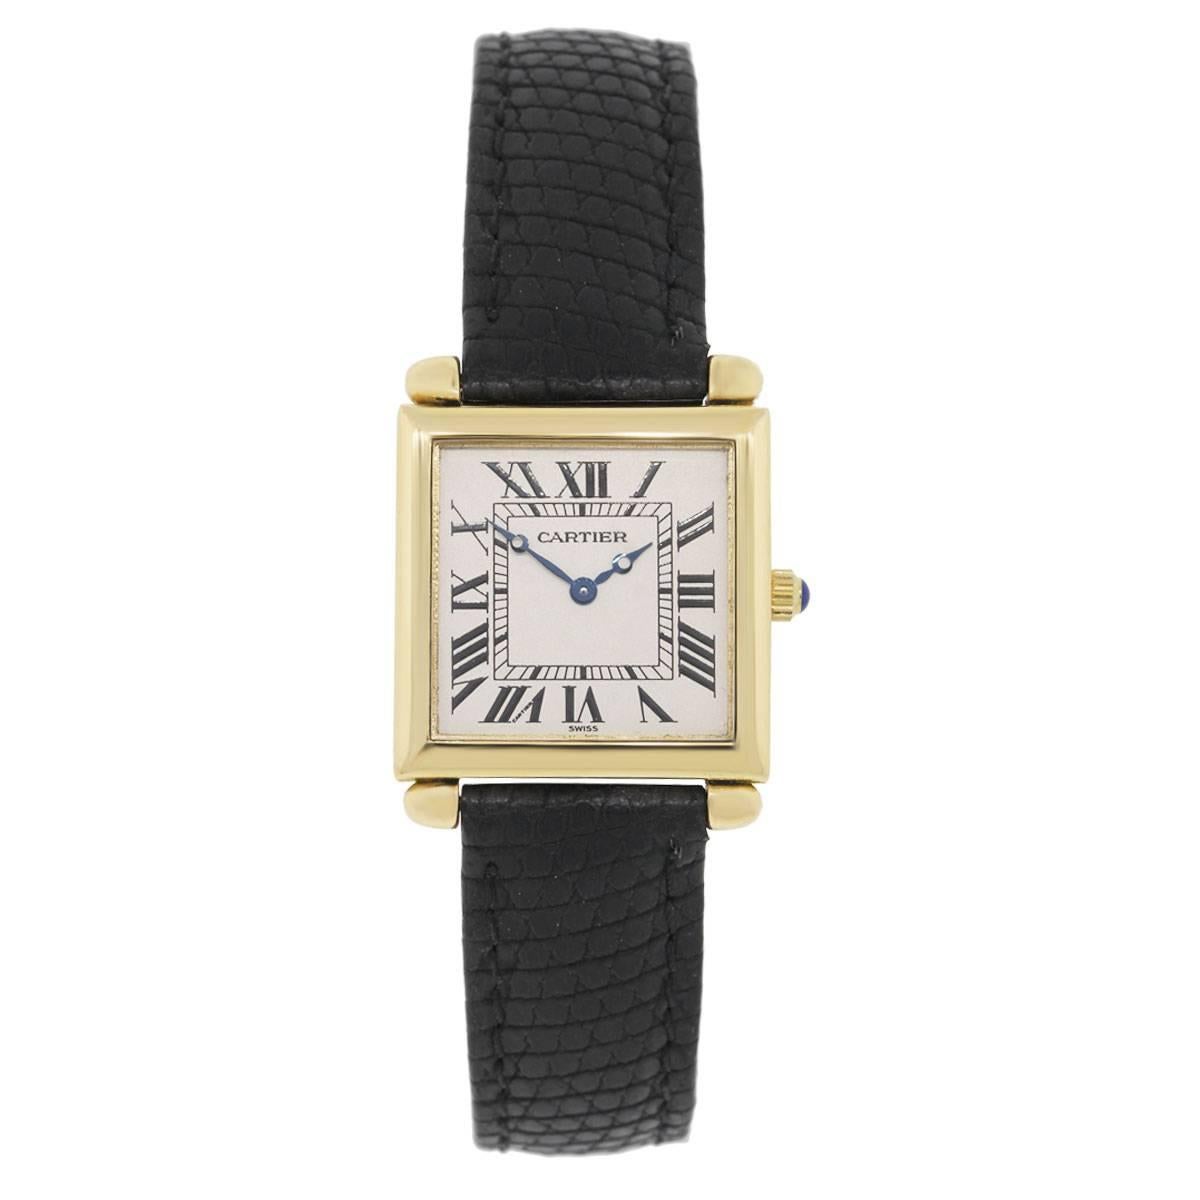 Brand: Cartier
MPN: 1630
Model: Tank Obus
Case Material: 18k Yellow Gold
Case Diameter: 24mm
Bezel: 18k yellow gold smooth fixed bezel
Dial: White roman dial with blue hands
Bracelet: Black leather
Size: Will fit a 6.25